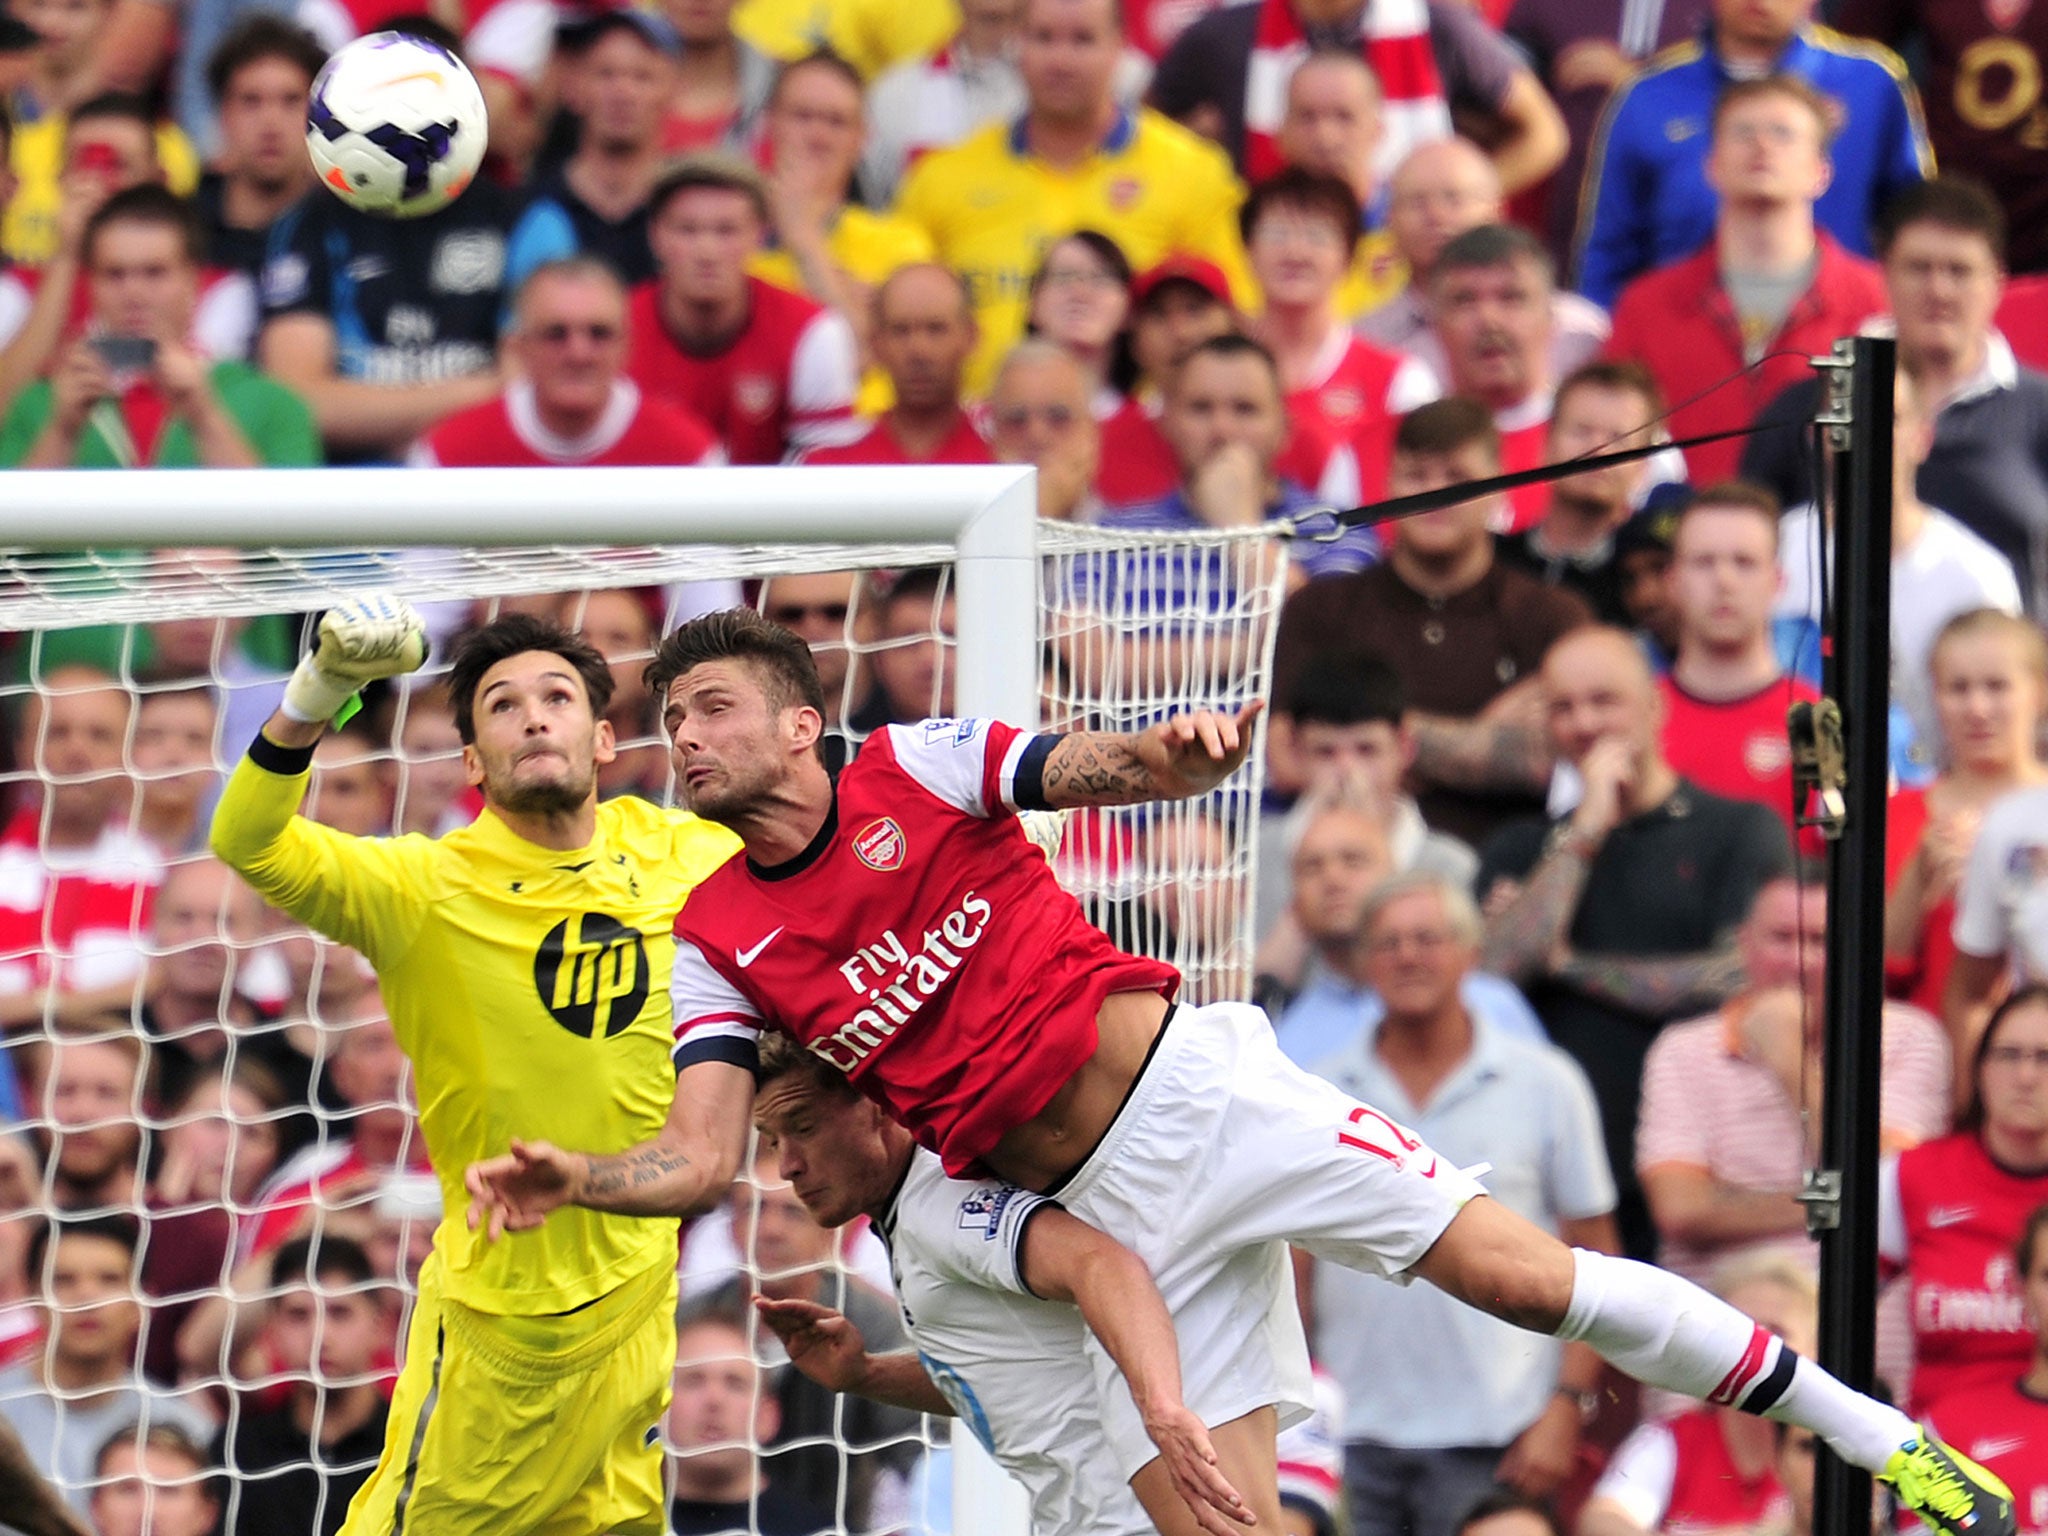 Arsenal striker Olivier Giroud has claimed that Hugo Lloris would love to join Arsenal